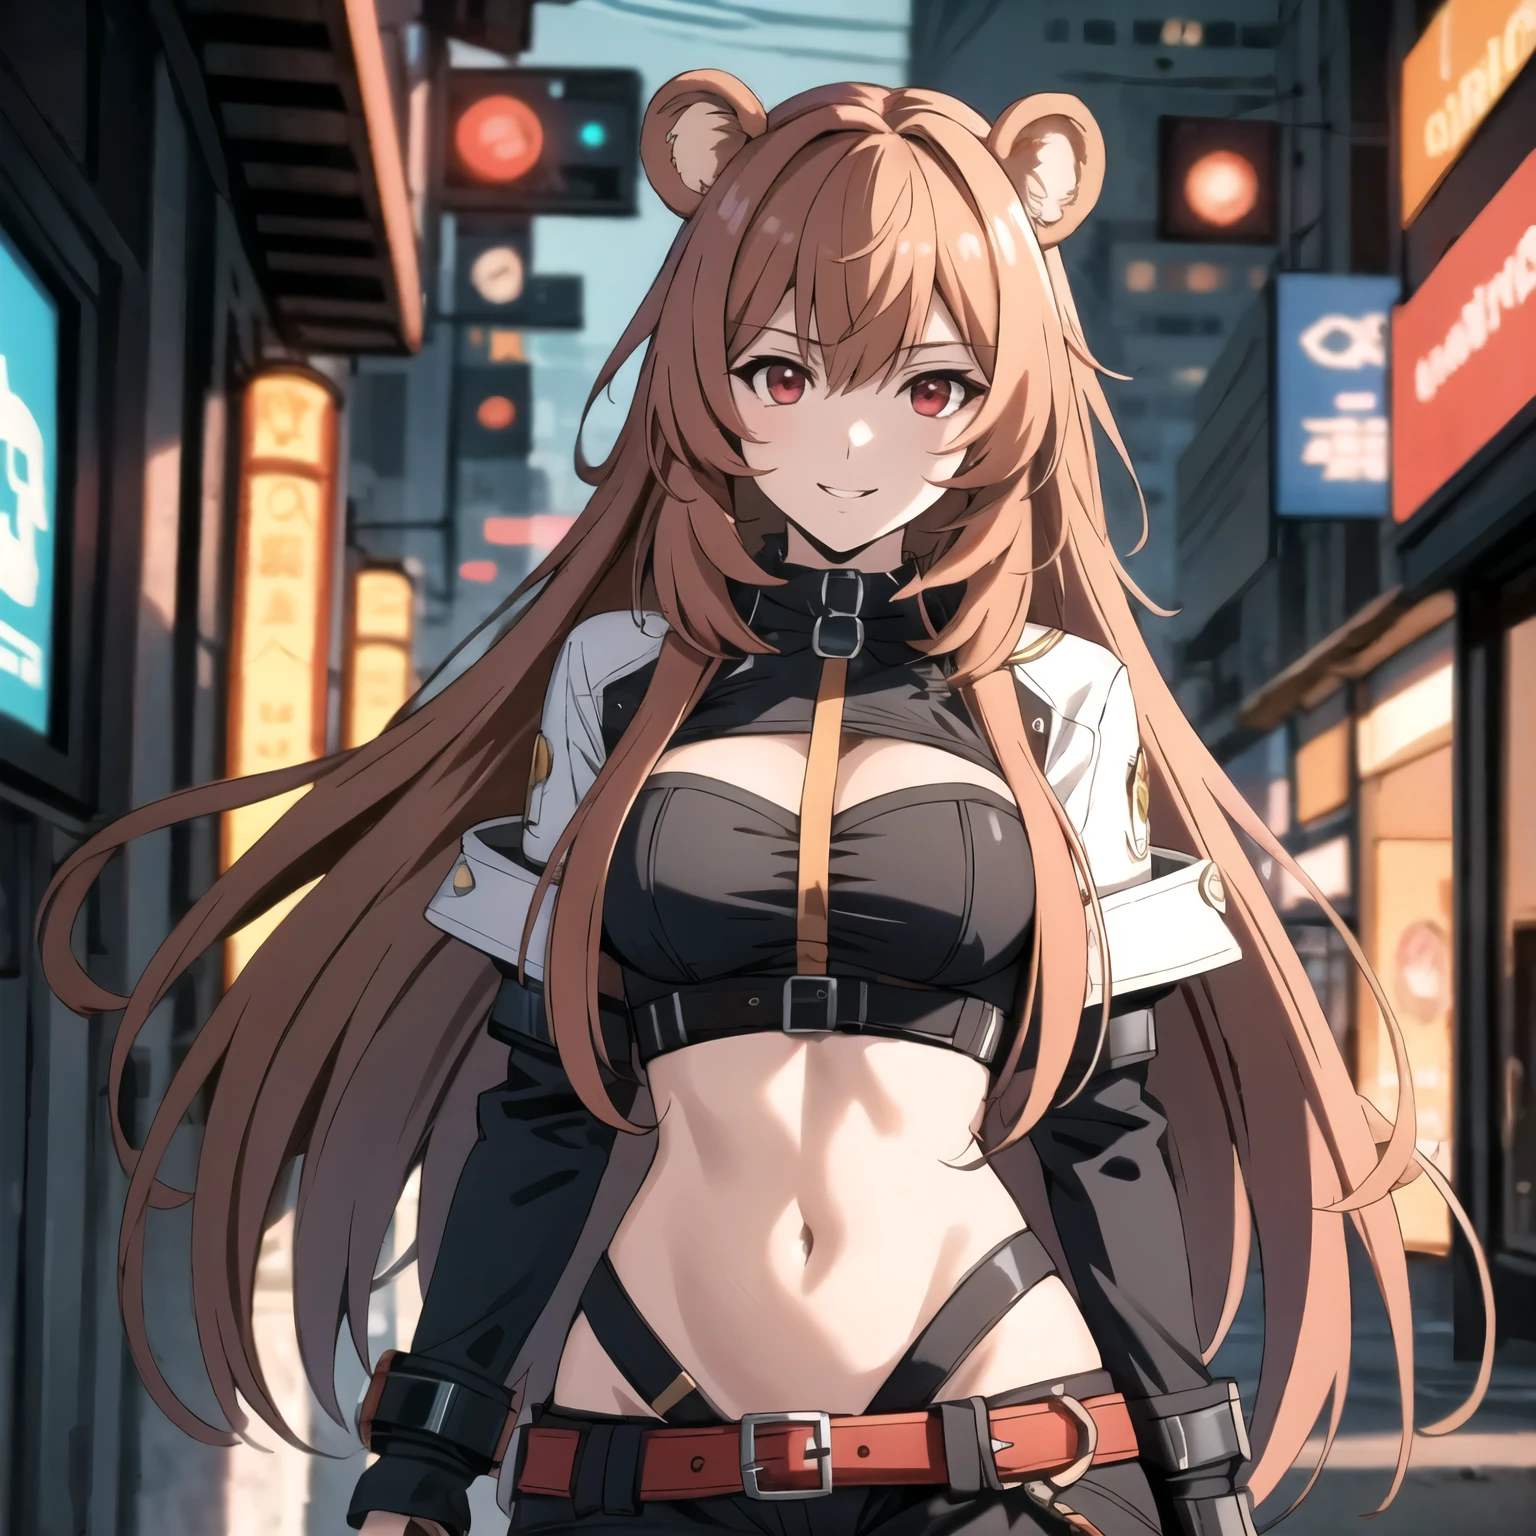 Raphtalia attractive woman. bear ears, orange blonde hair, red eyes like rubies, open mouth smile, blush, big breasts, neckline .short cyberpunk style clothes,  neon buildings background .